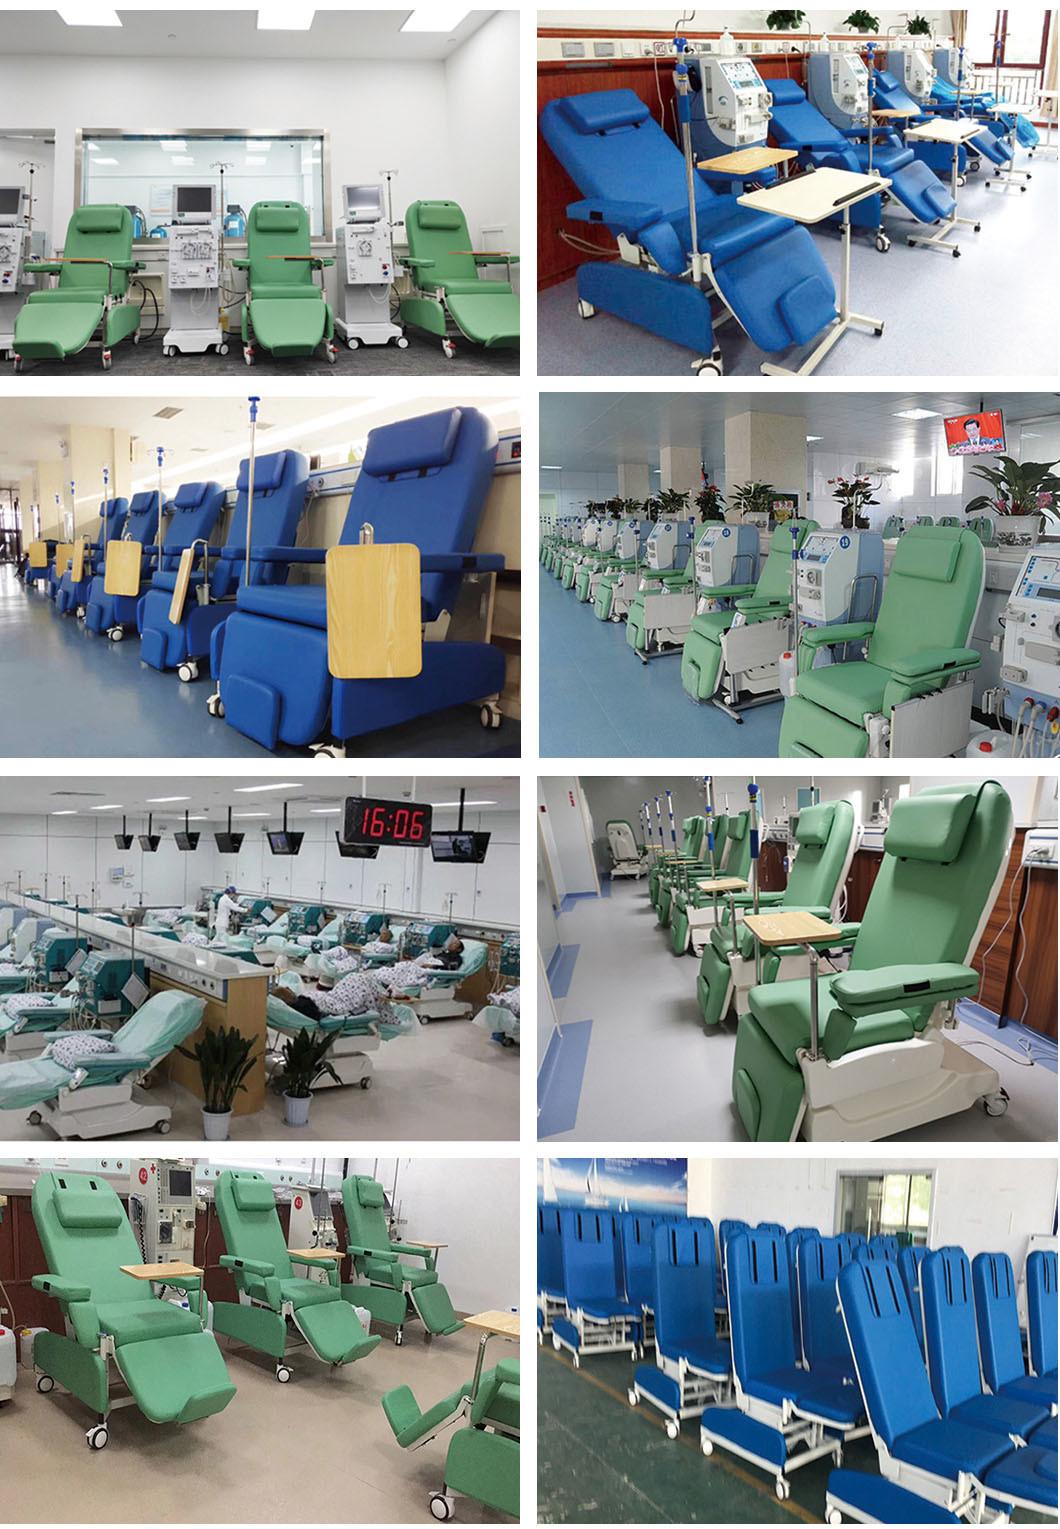 Hot Sales Good Quality Electric Blood Collection Chair Podiatry Chairs for Sale Dialysis Chair